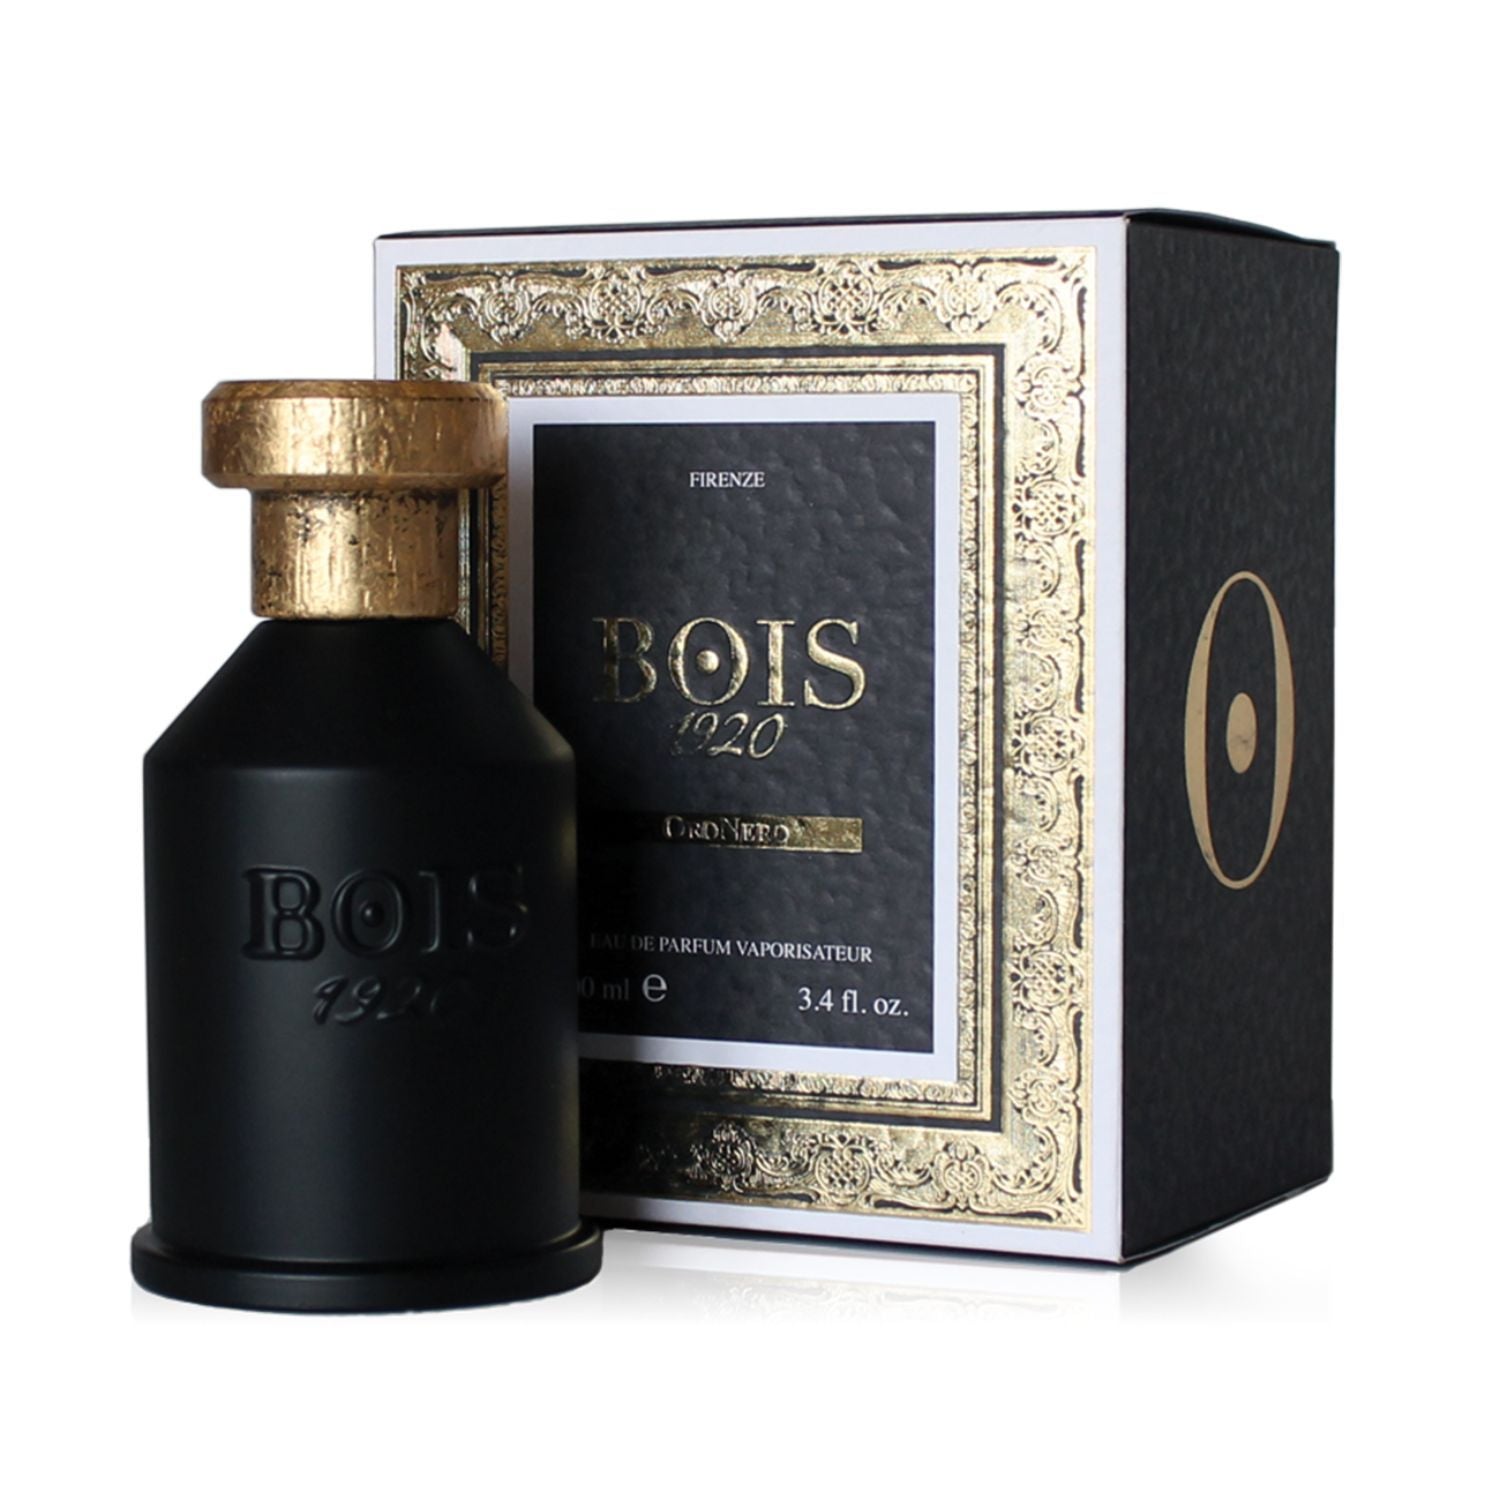 Bois 1920 – Oro Nero, A Woody Fragrance For Women And Menan Oriental Exciting Blend Full Of Mysteriousnessa Rich And Spicy Composition Of Saffron, Orange, Bergamot Surrounds A Heart Of Cedar, Sandalwood And Patchoulia Daring Essence With A Base Of Sweet Vanilla, Leather And Amberoro Nero, A Harmonious Fragrance That You Will Definitely Enjoy.Top Notes: Saffron, Orange, Cloves And Bergamot; Heart Notes: Sandalwood, Patchouli, Cedar And Ylang-Ylang; Base Notes: Vanilla, Leather And Amber.